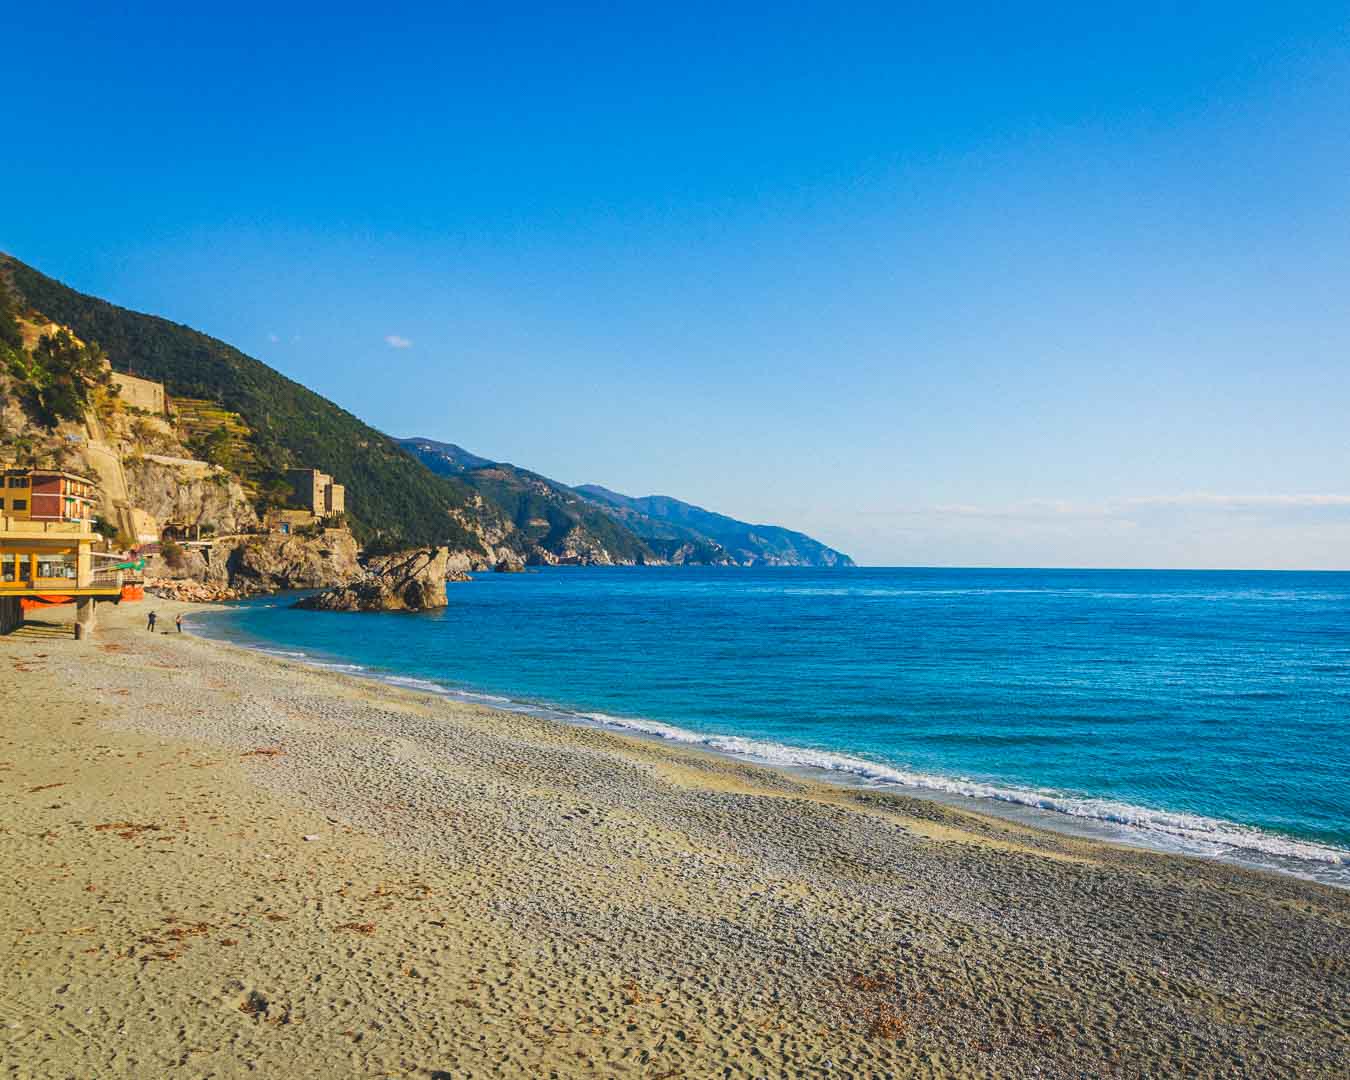 view from the beach in monterosso